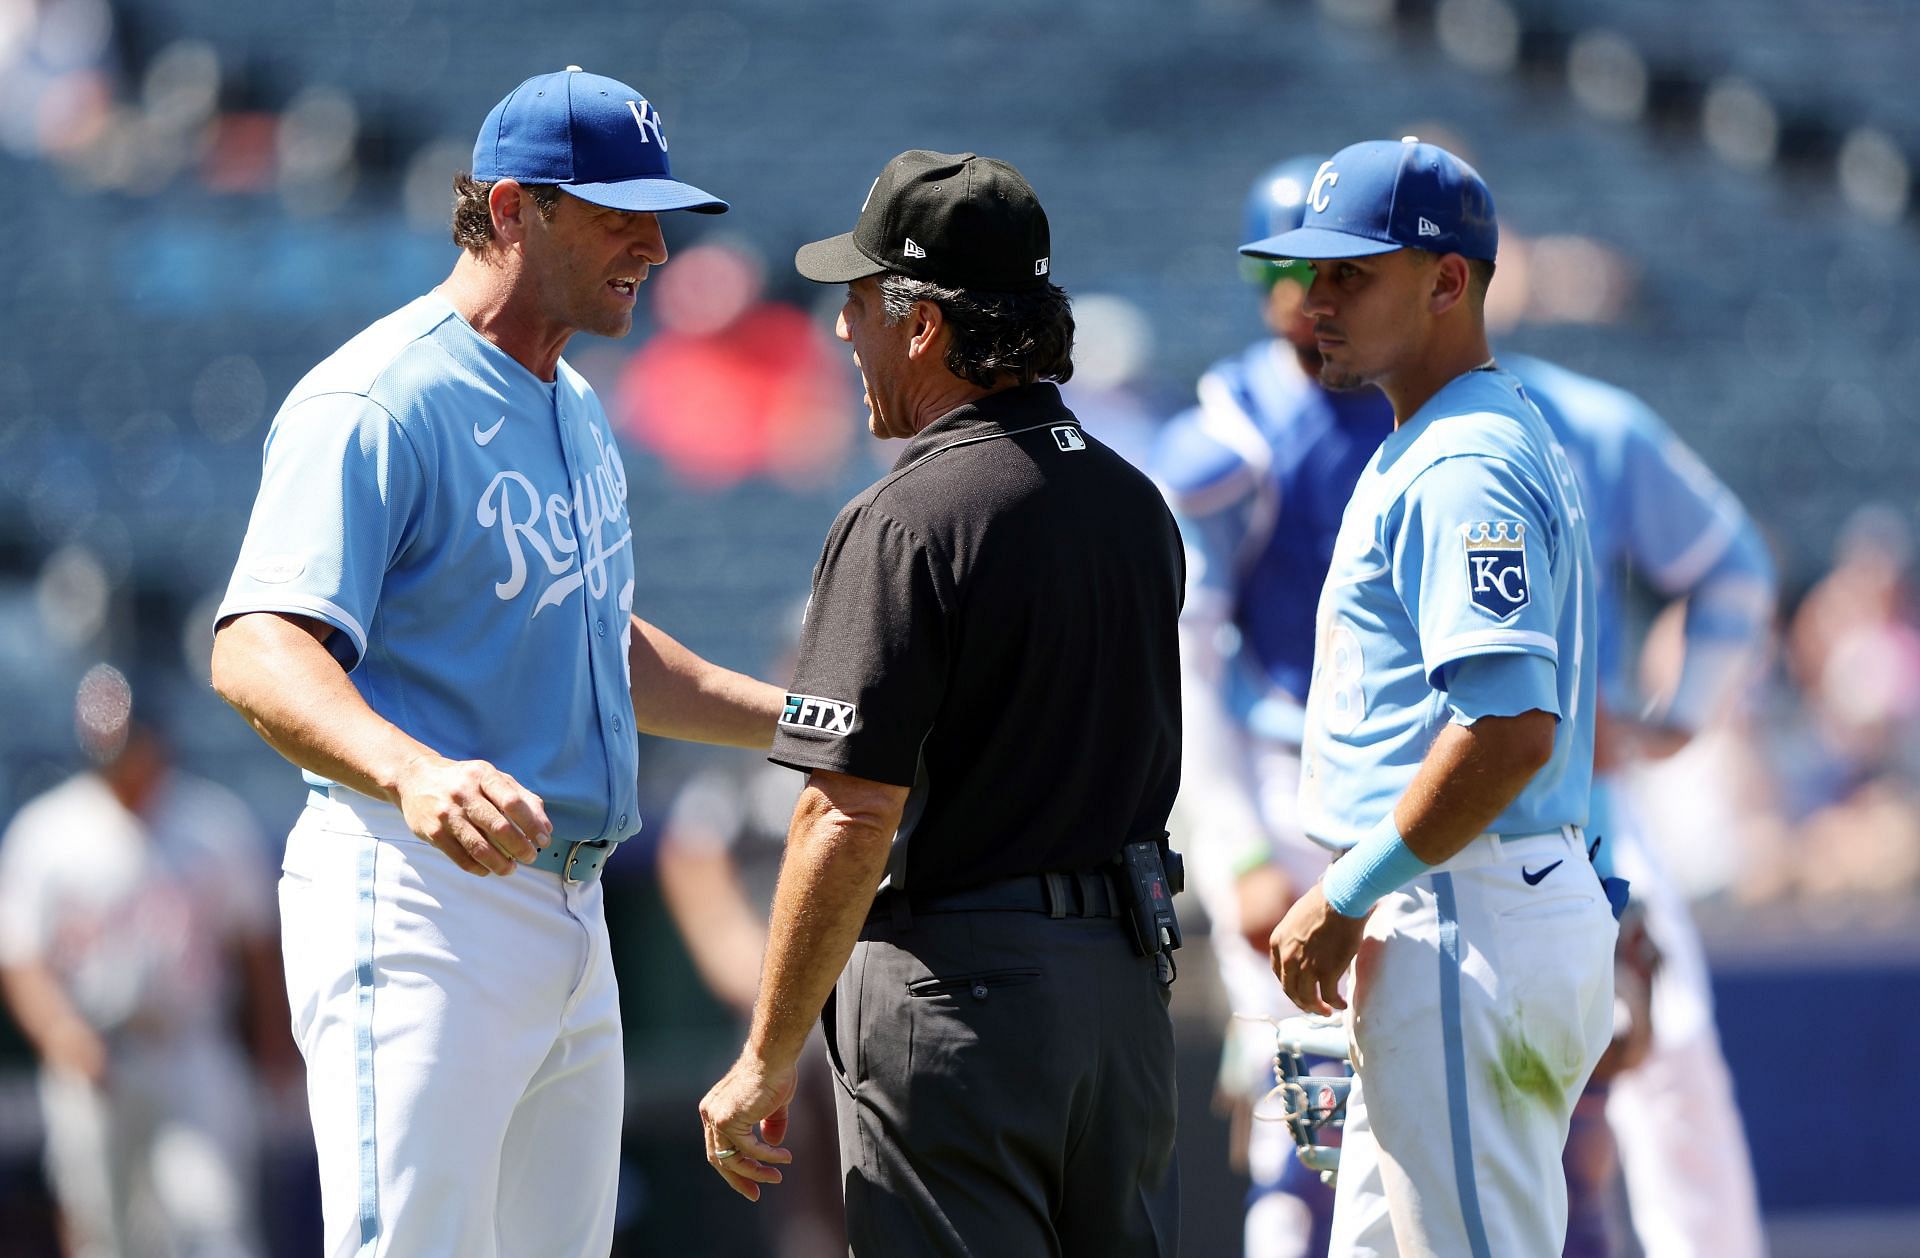 Manager Mike Matheny of the Kansas City Royals argues with umpire Phil Cuzzi during the game